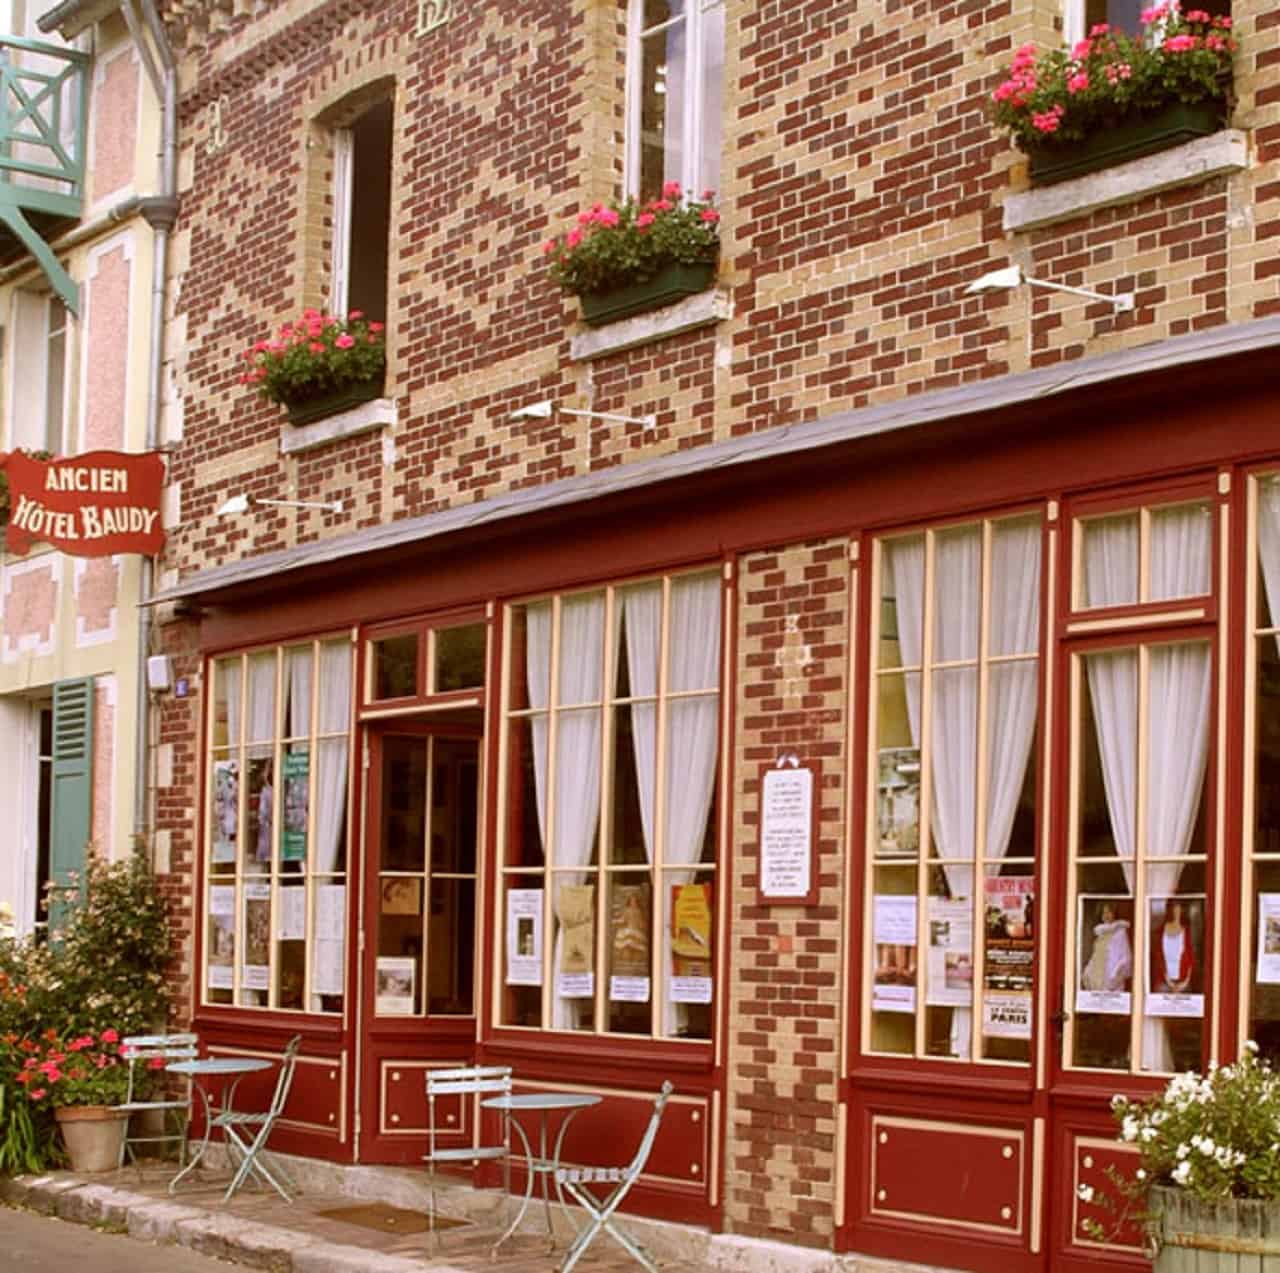 Eat at Le Baudy while on a Giverny day trip from Paris, France